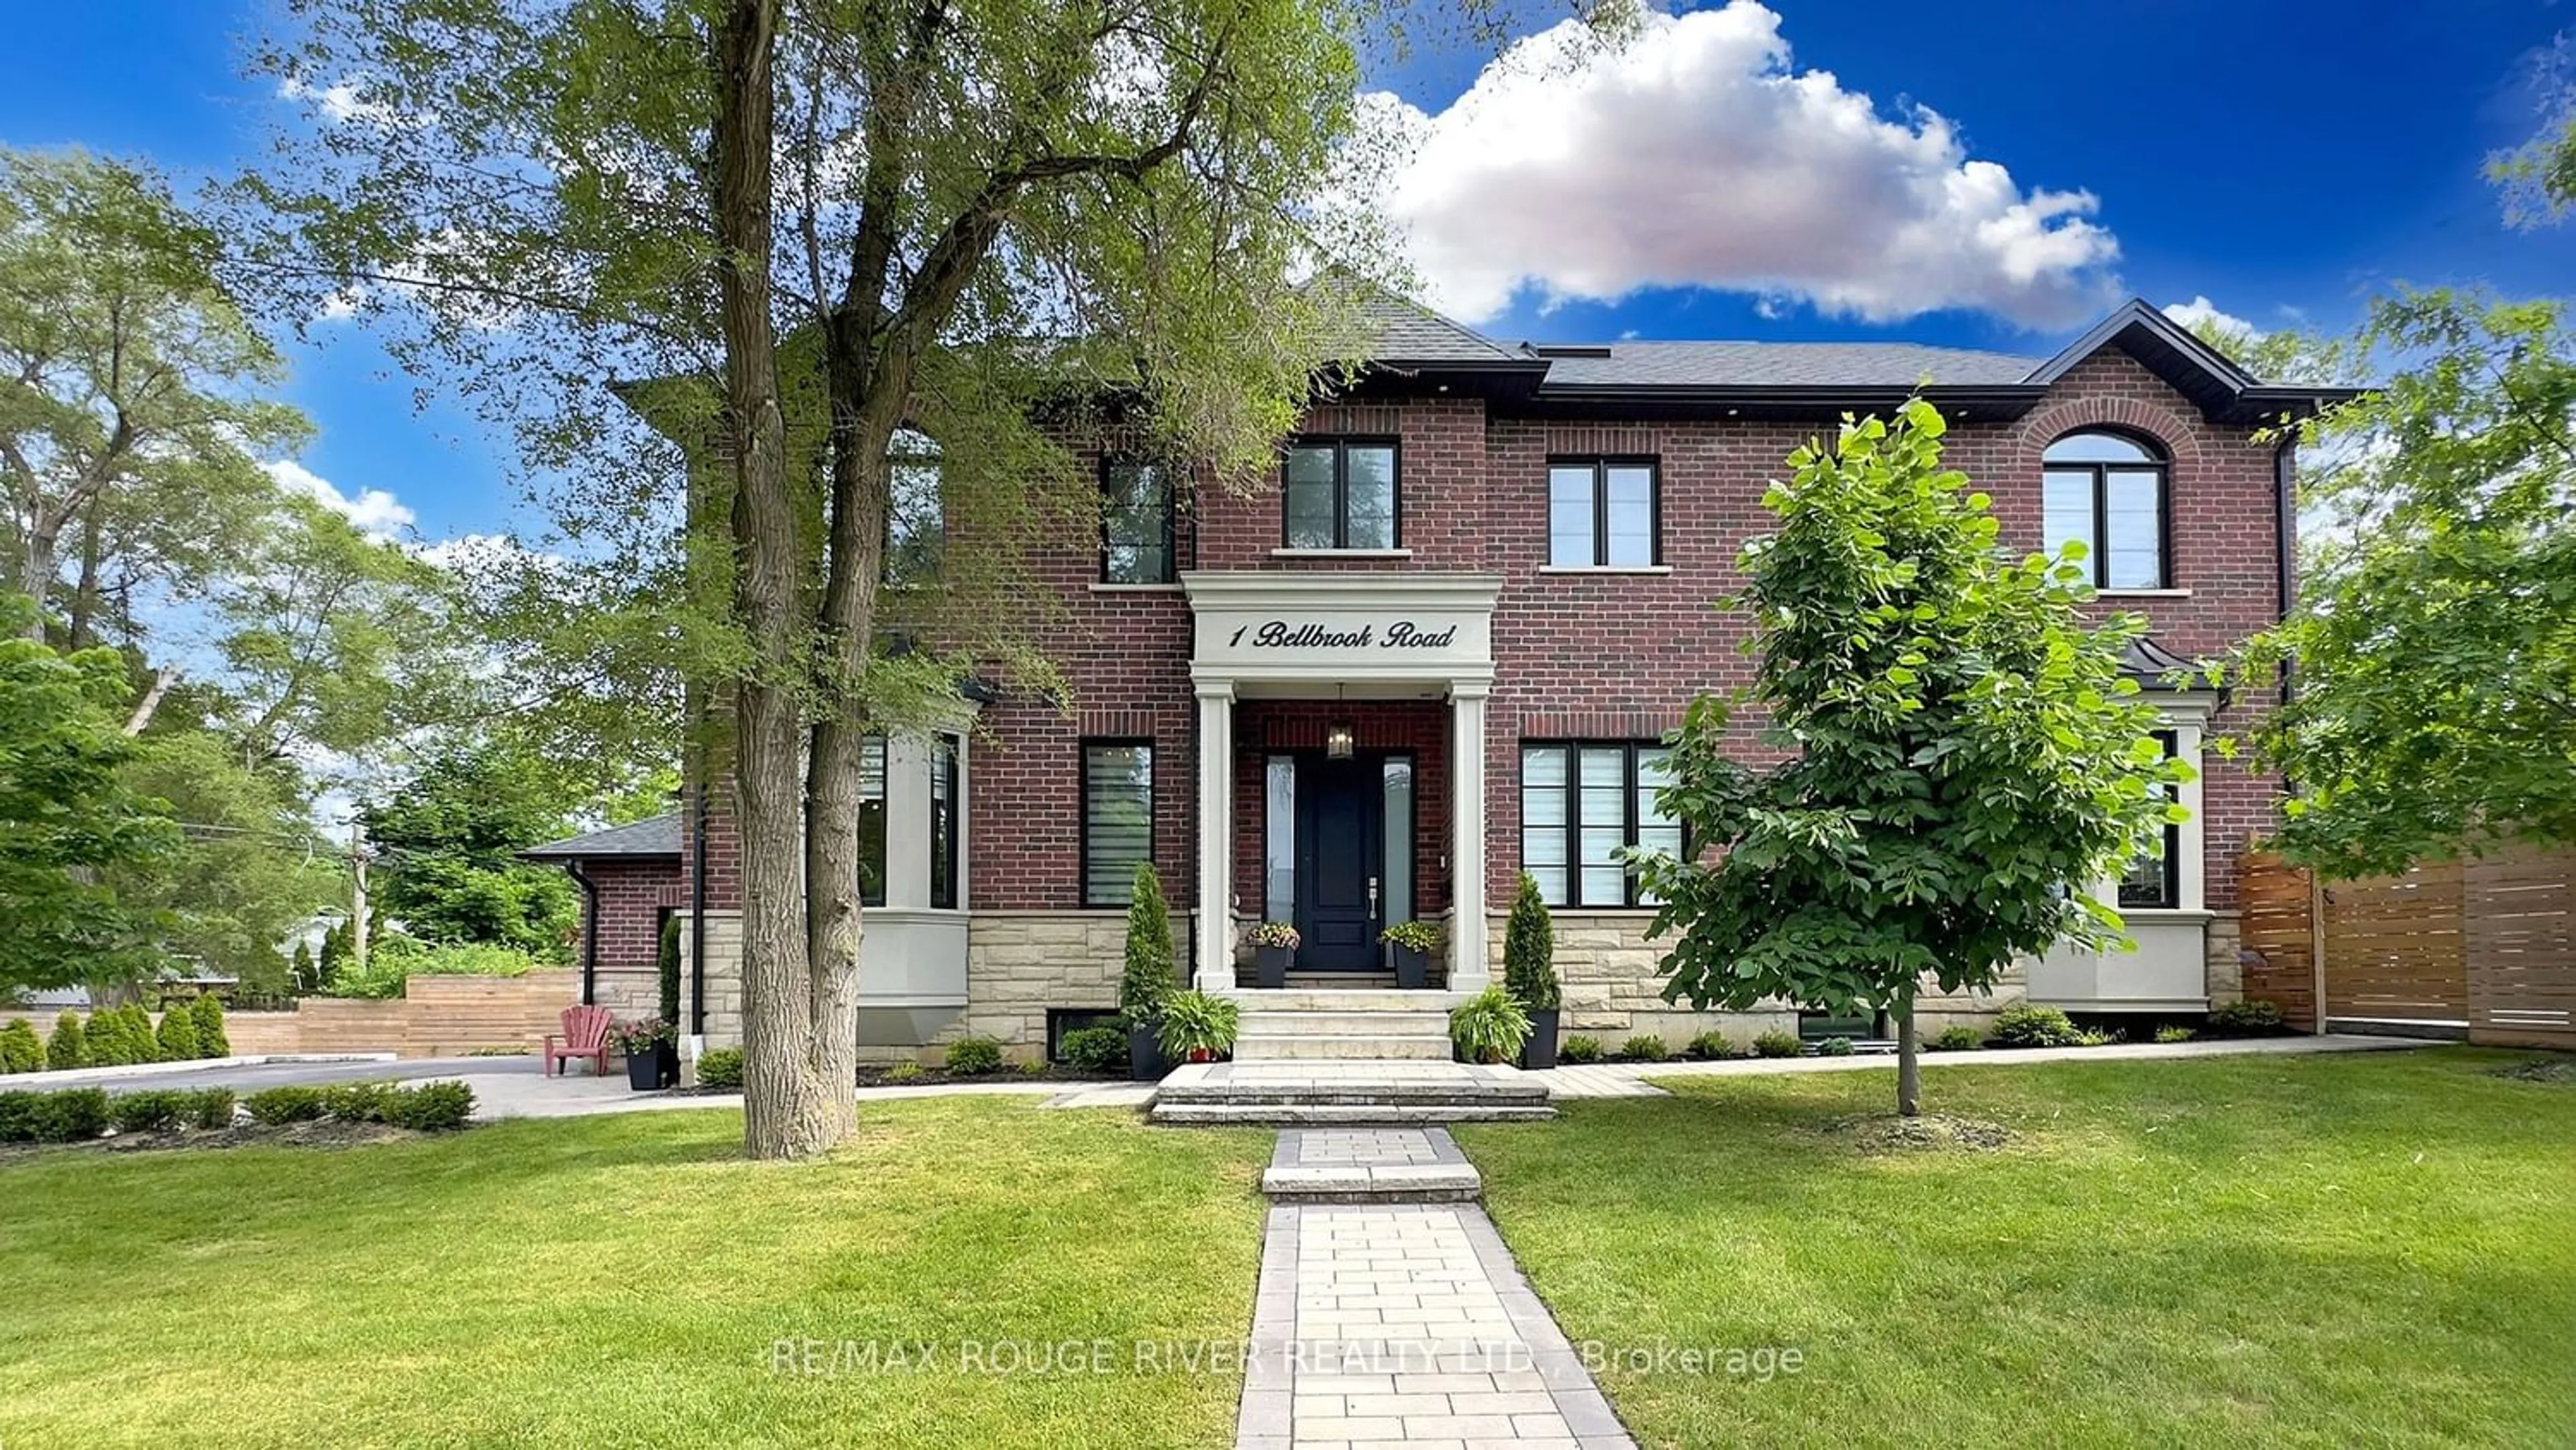 Home with brick exterior material for 1 Bellbrook Rd, Toronto Ontario M1S 1J8